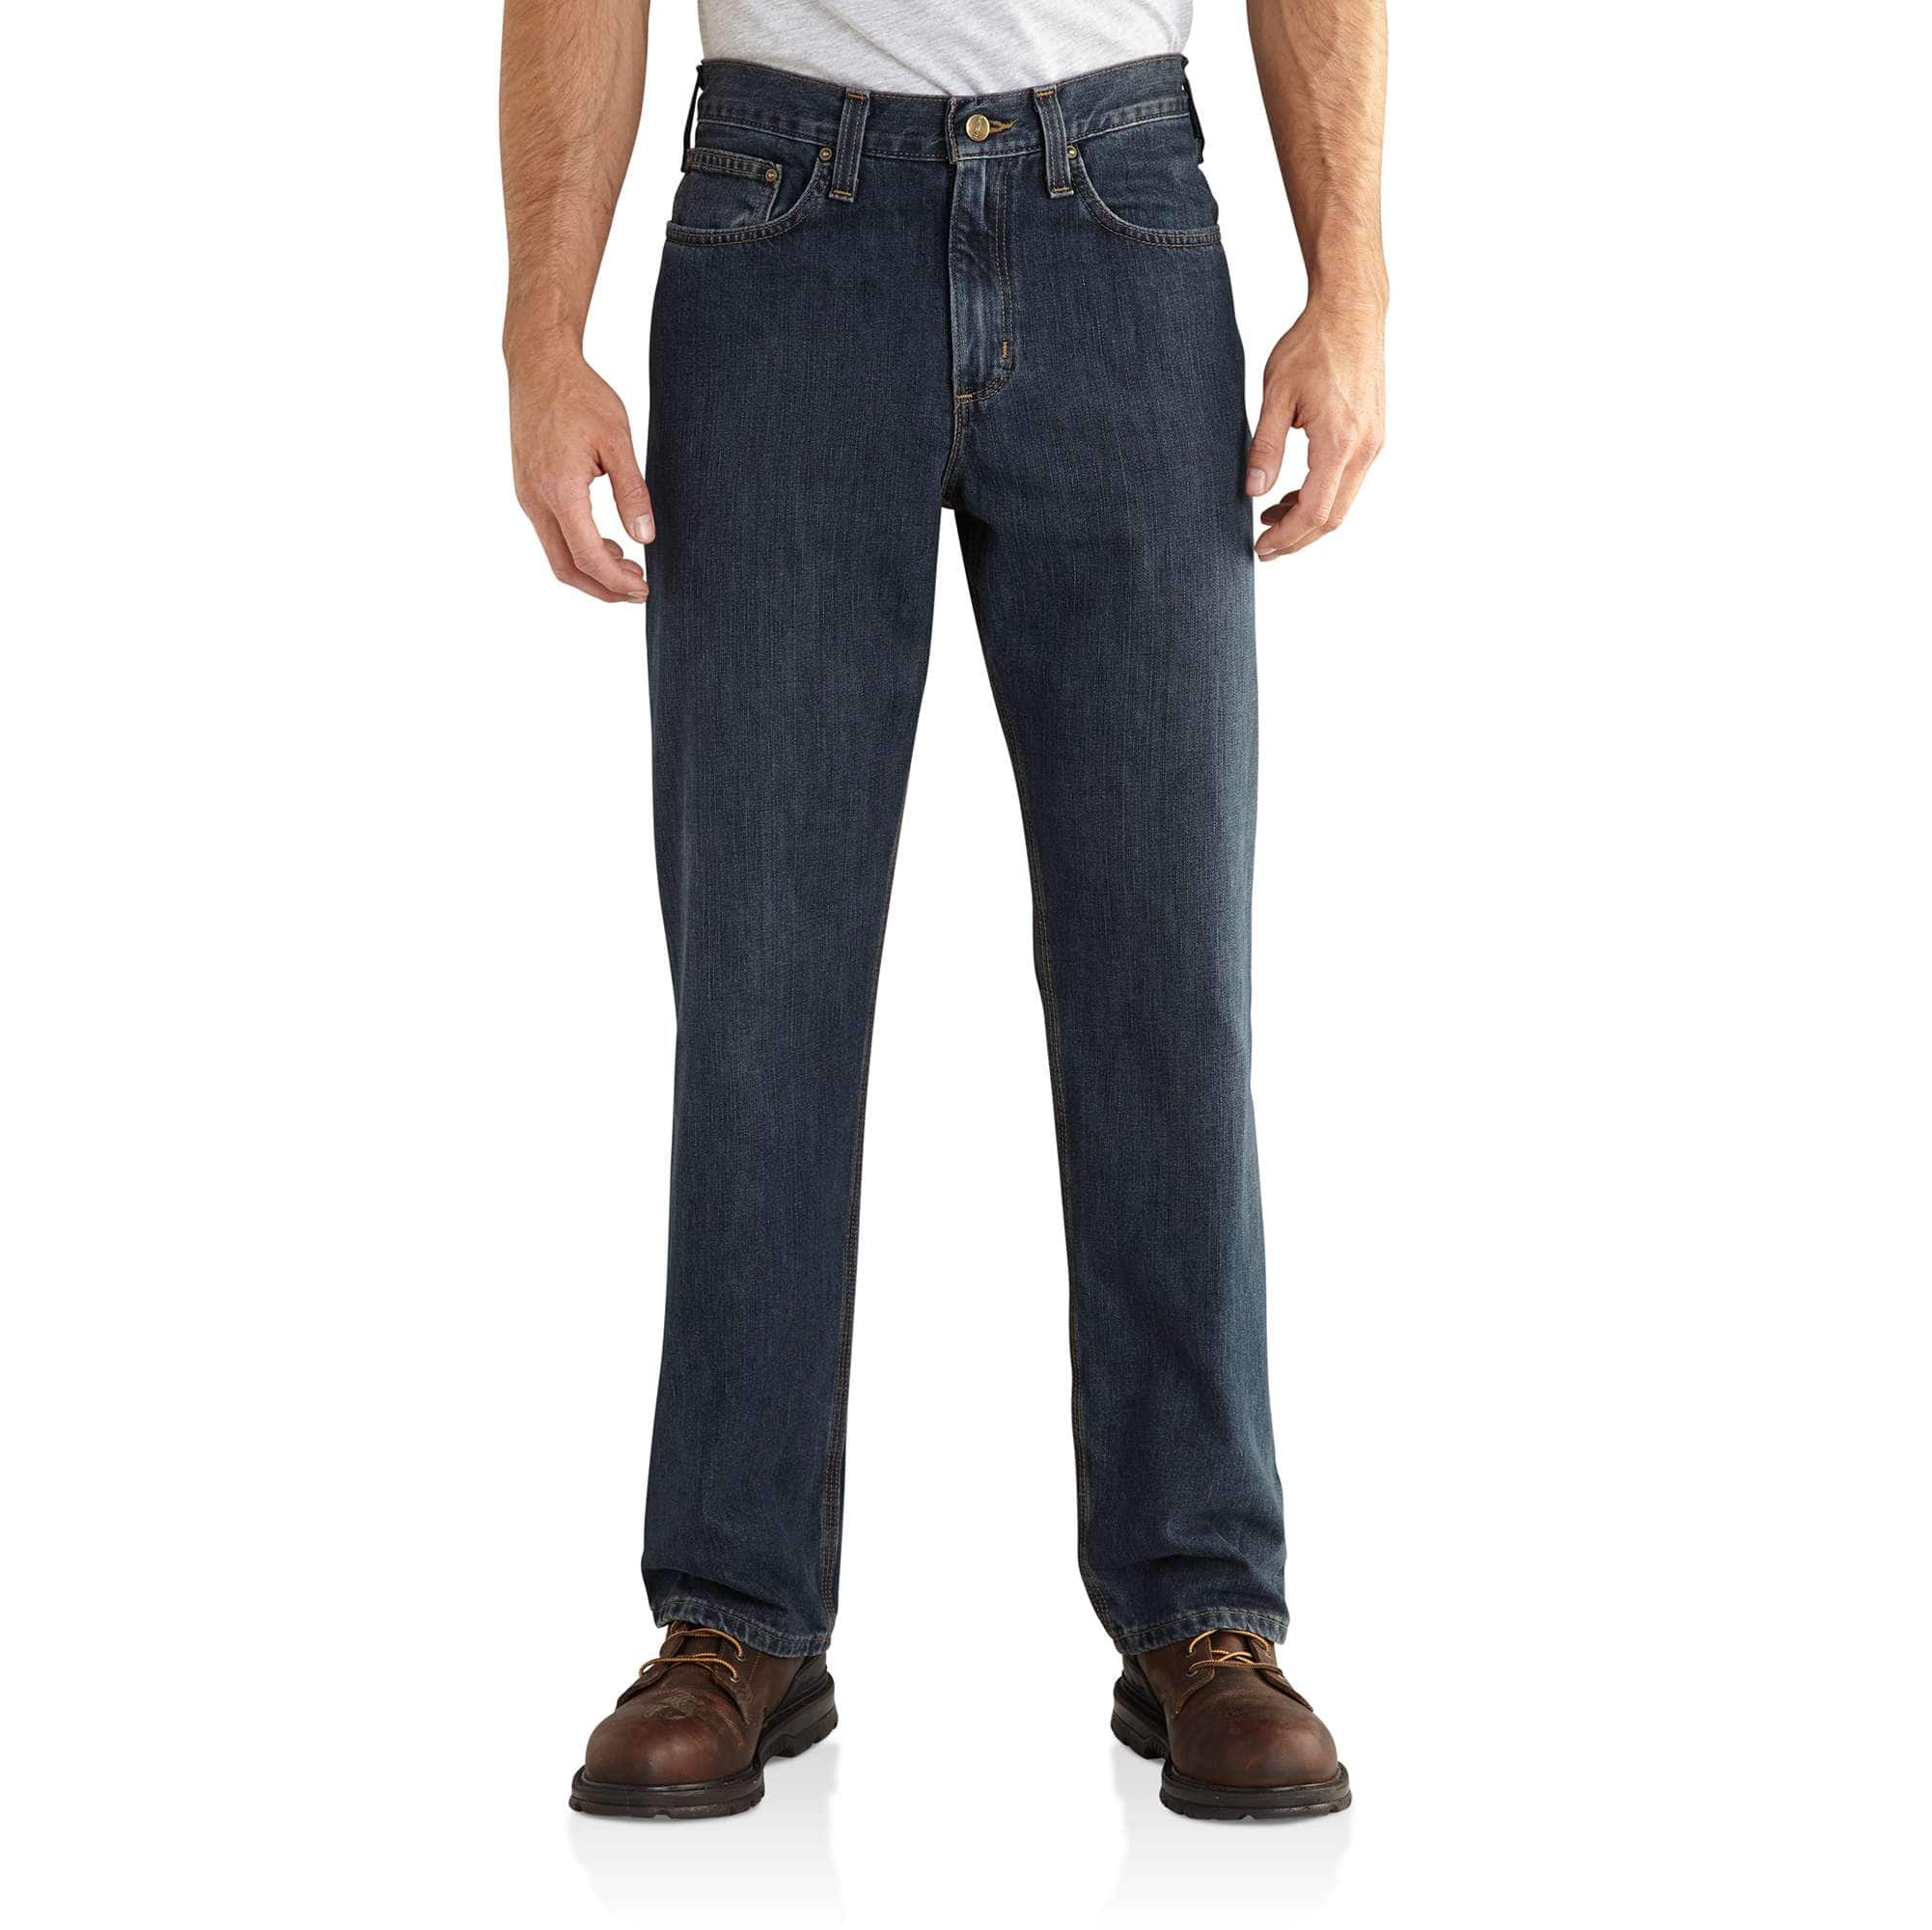 Men's Relaxed Fit Holter Jean 101483 | Carhartt